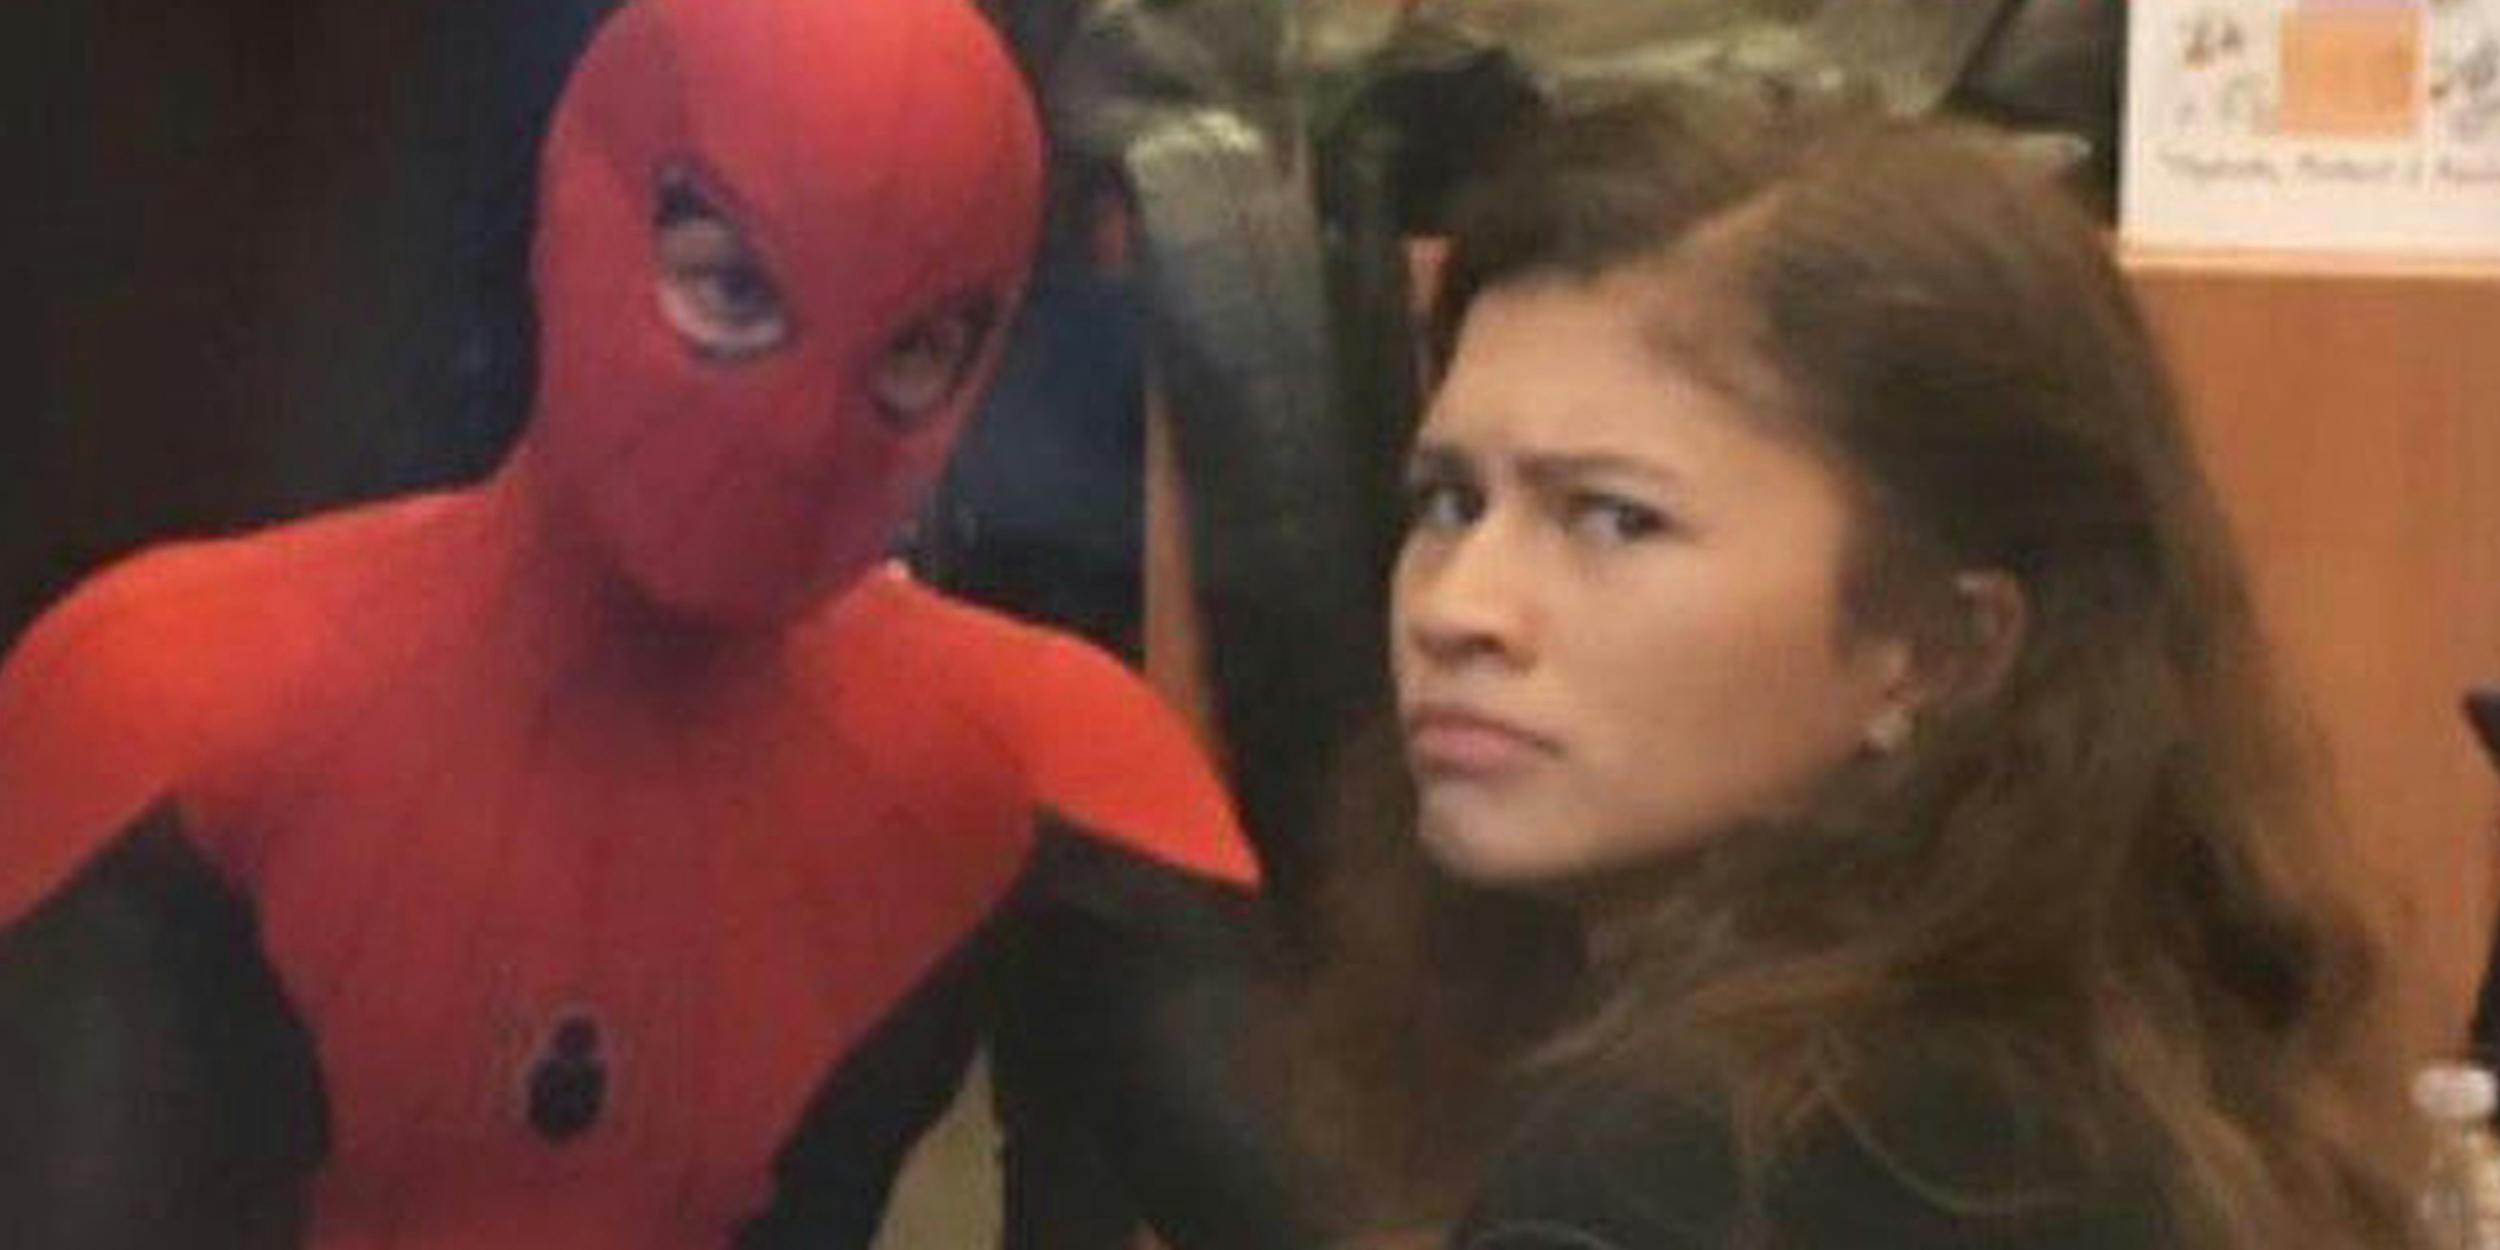 This behind-the-scenes photo of Tom Holland and Zendaya has become a